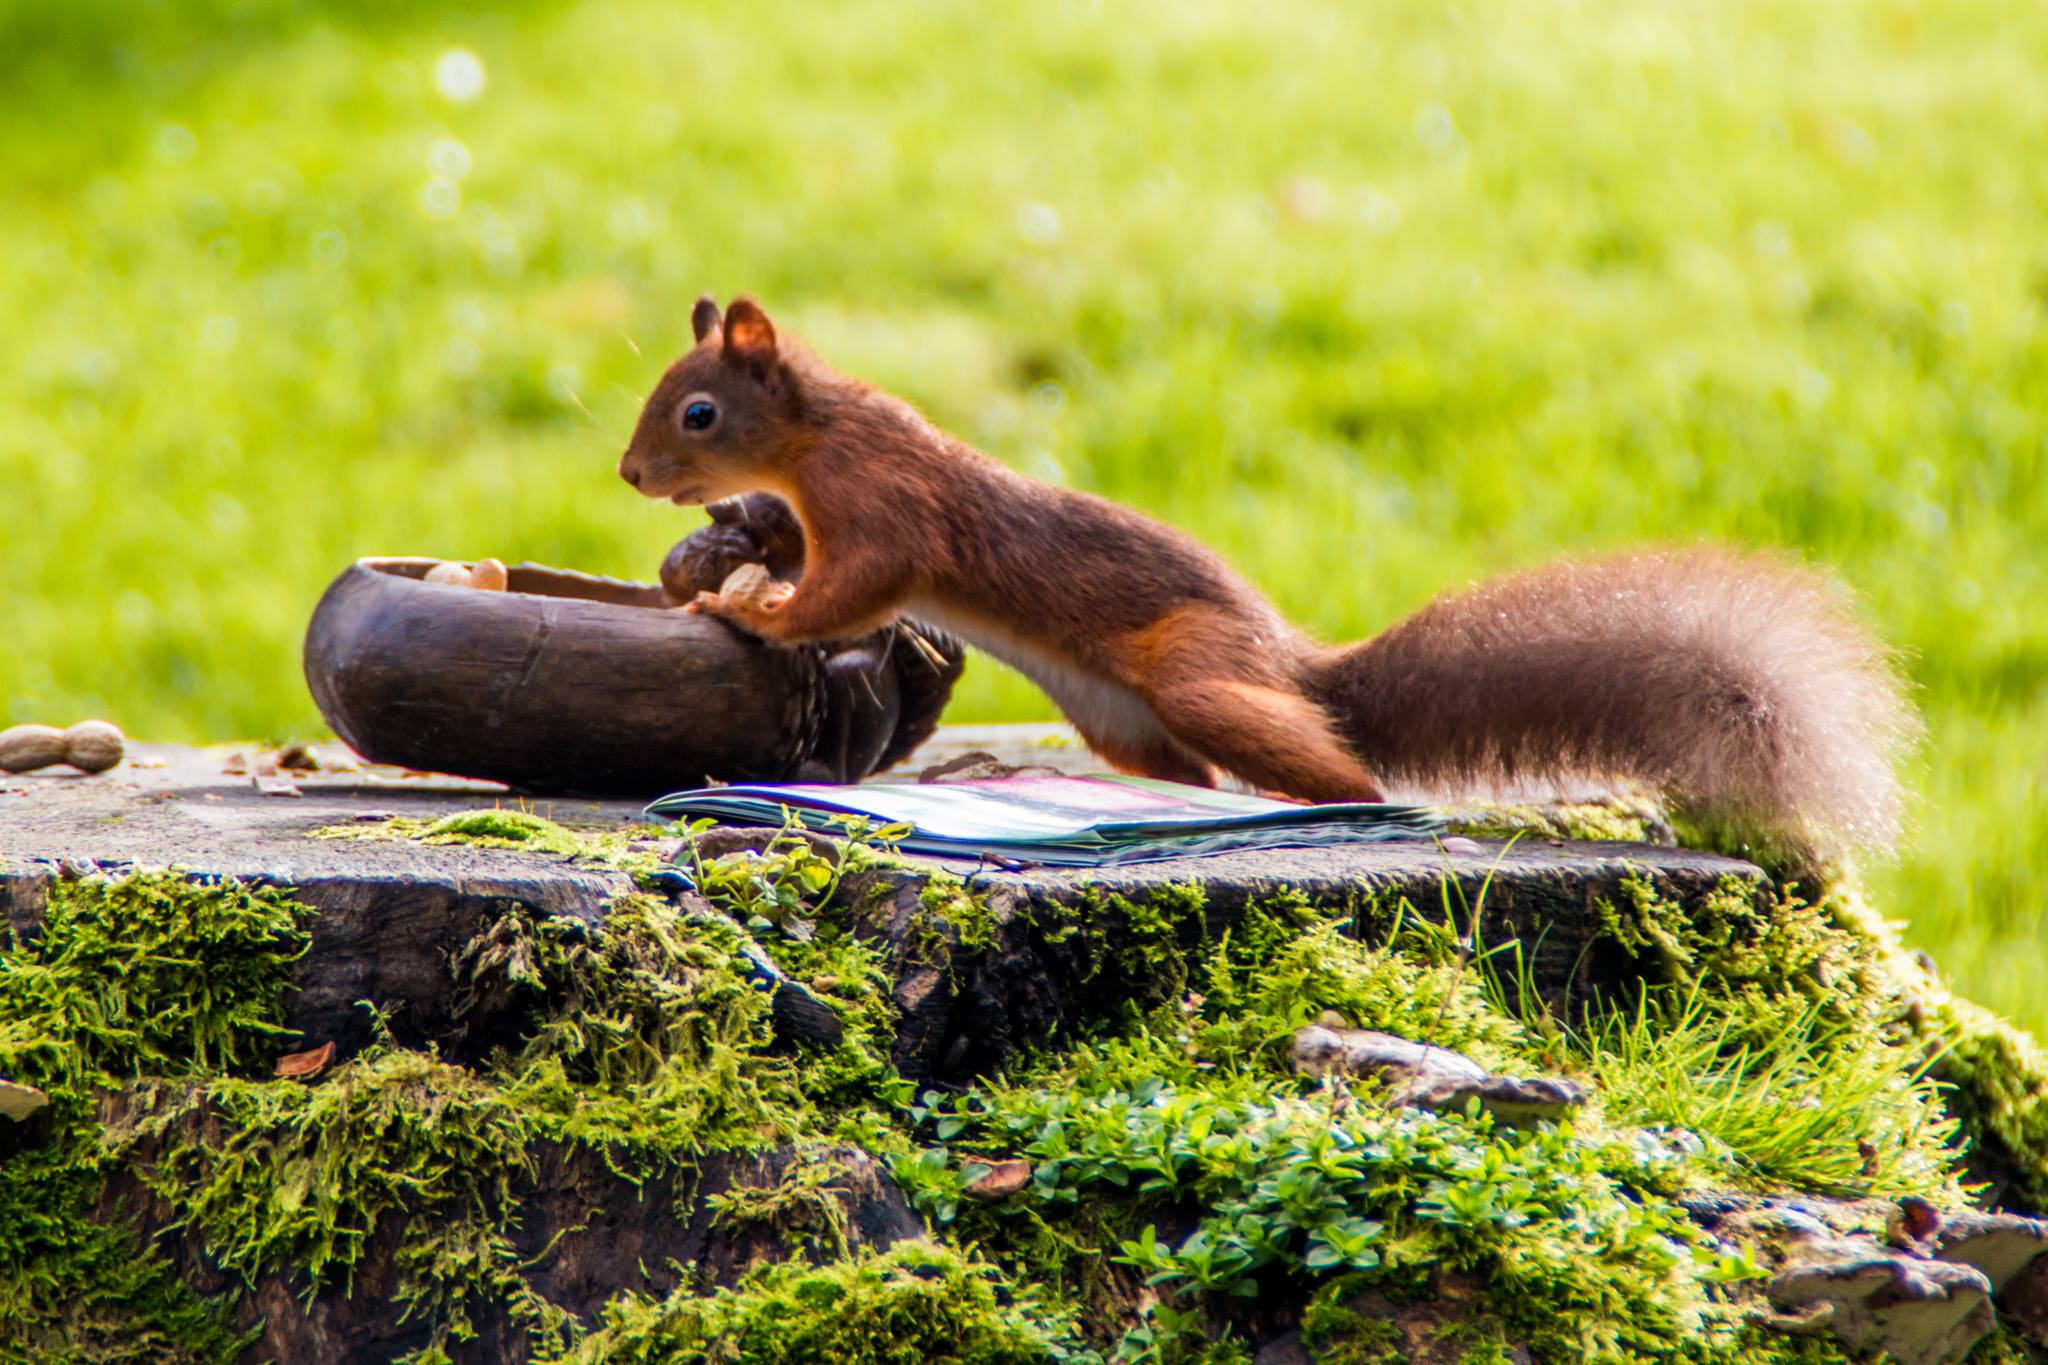 Red squirrel in the wild at Allan Bank, Grasmere